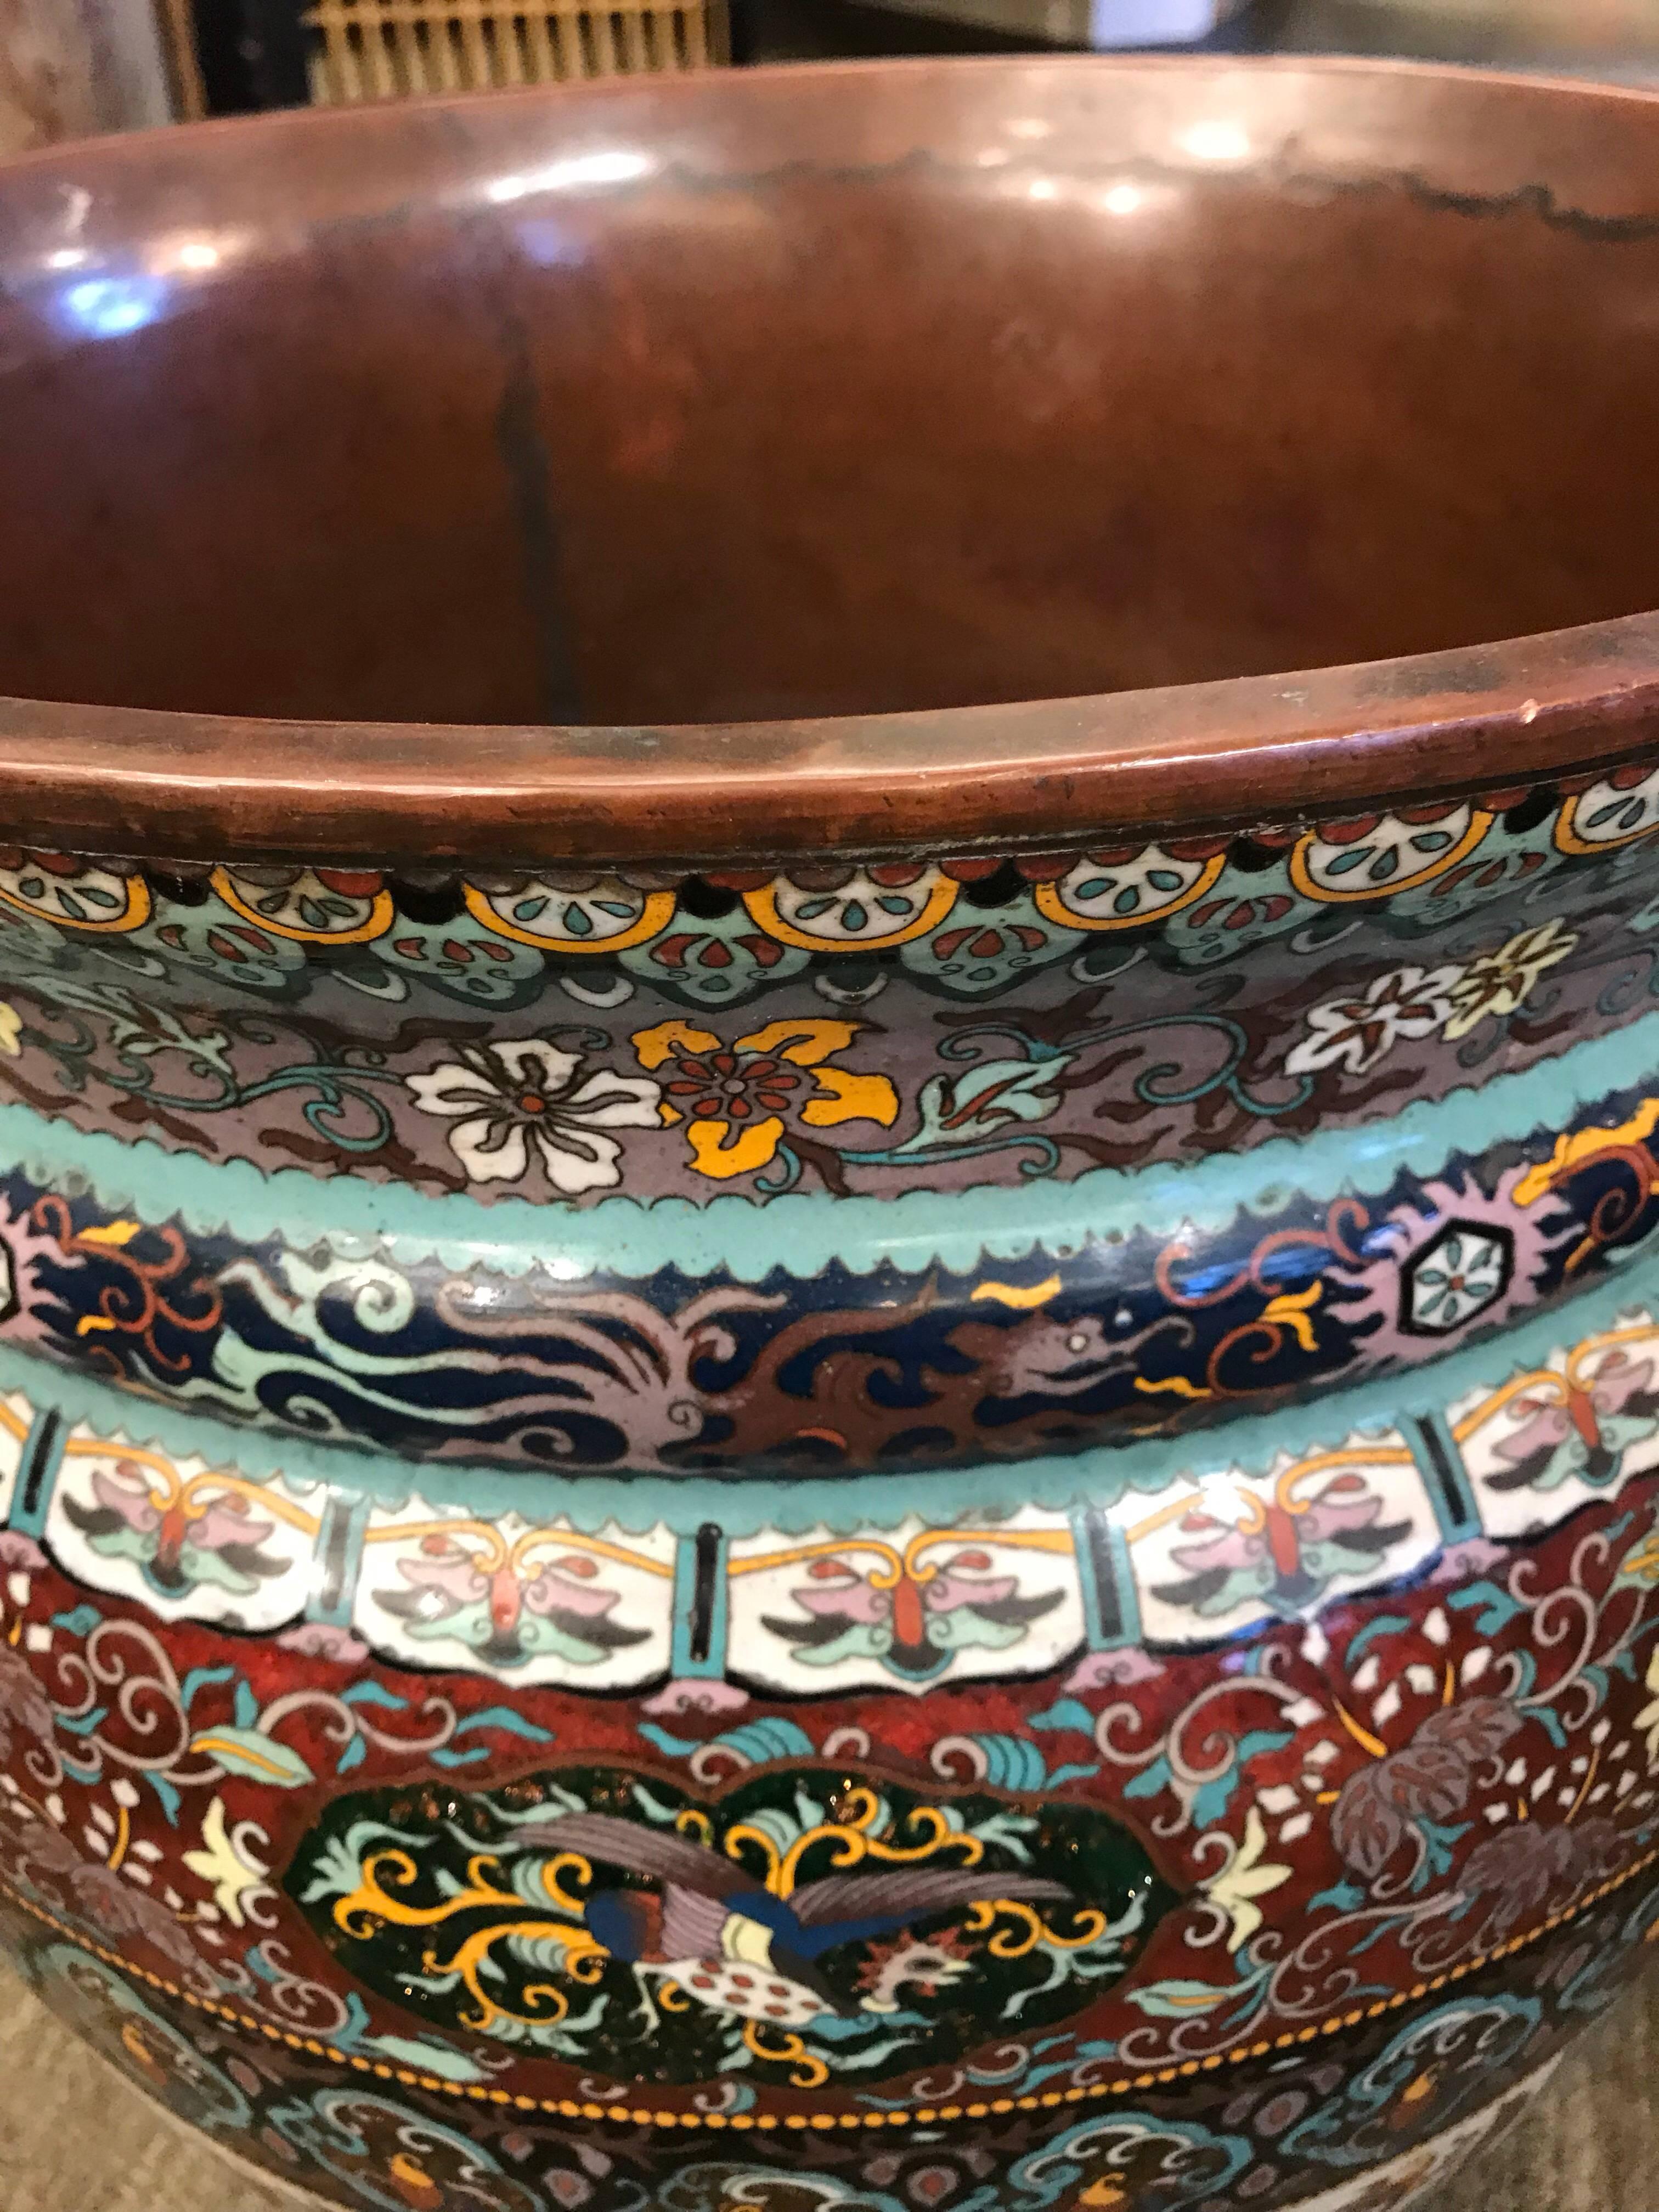 A very large pair of early 20th century Japanese planters, made of cloisonné. With very detailed borders, and gorgeous colors.

These would be perfect indoors to hold large plants, or beautiful under a large table or on a shelf all by themselves.